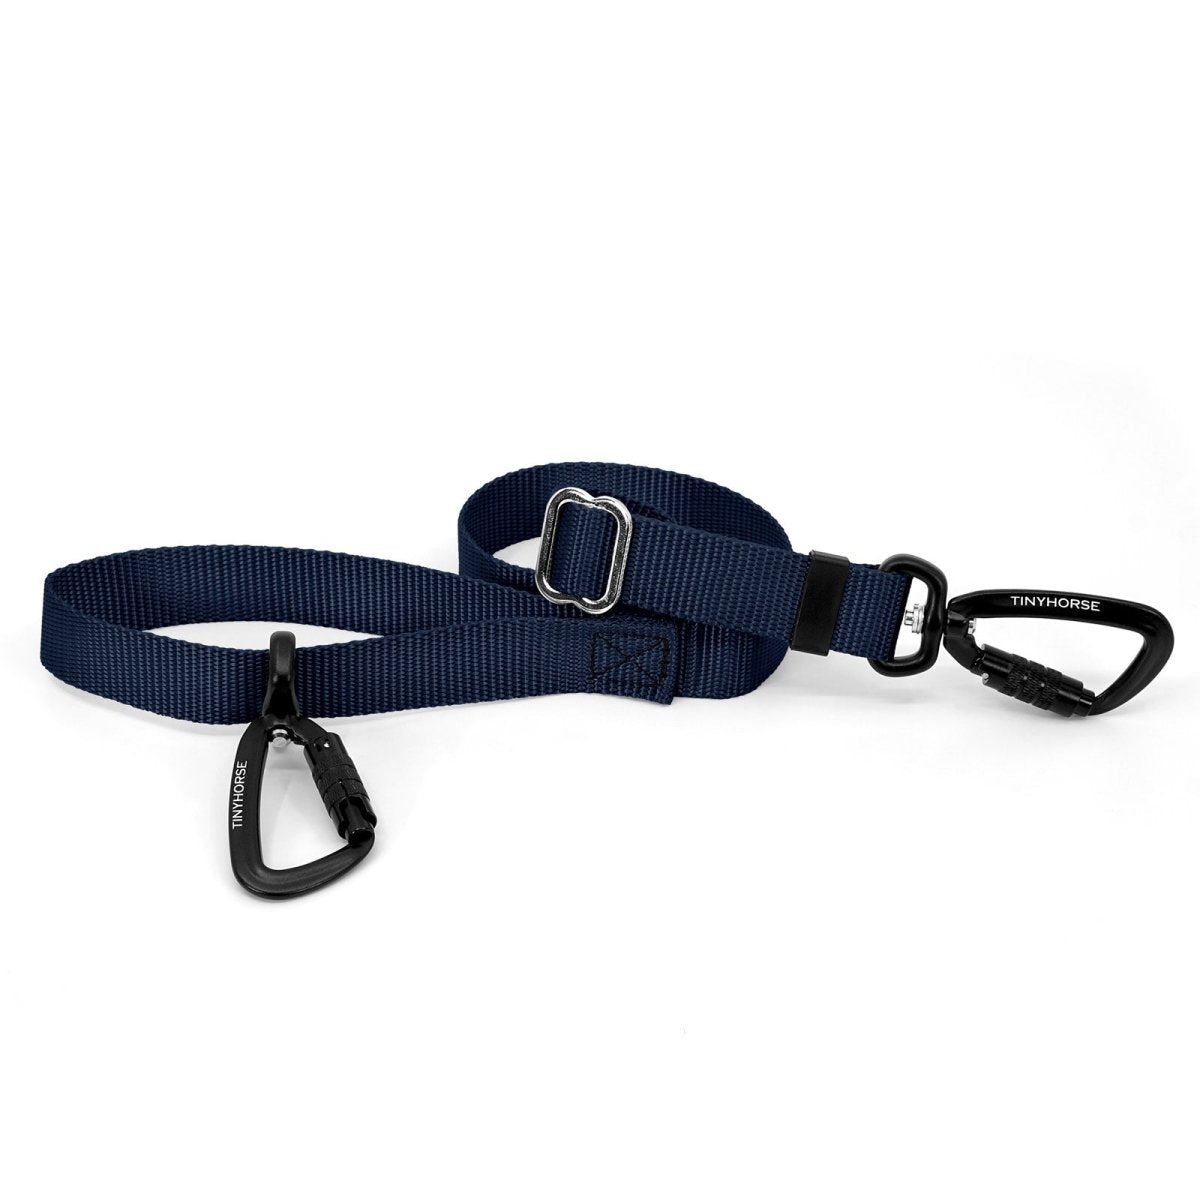 A navy-coloured Lead-All Lite with an adjustable nylon webbing leash and 2 auto-locking carabiners